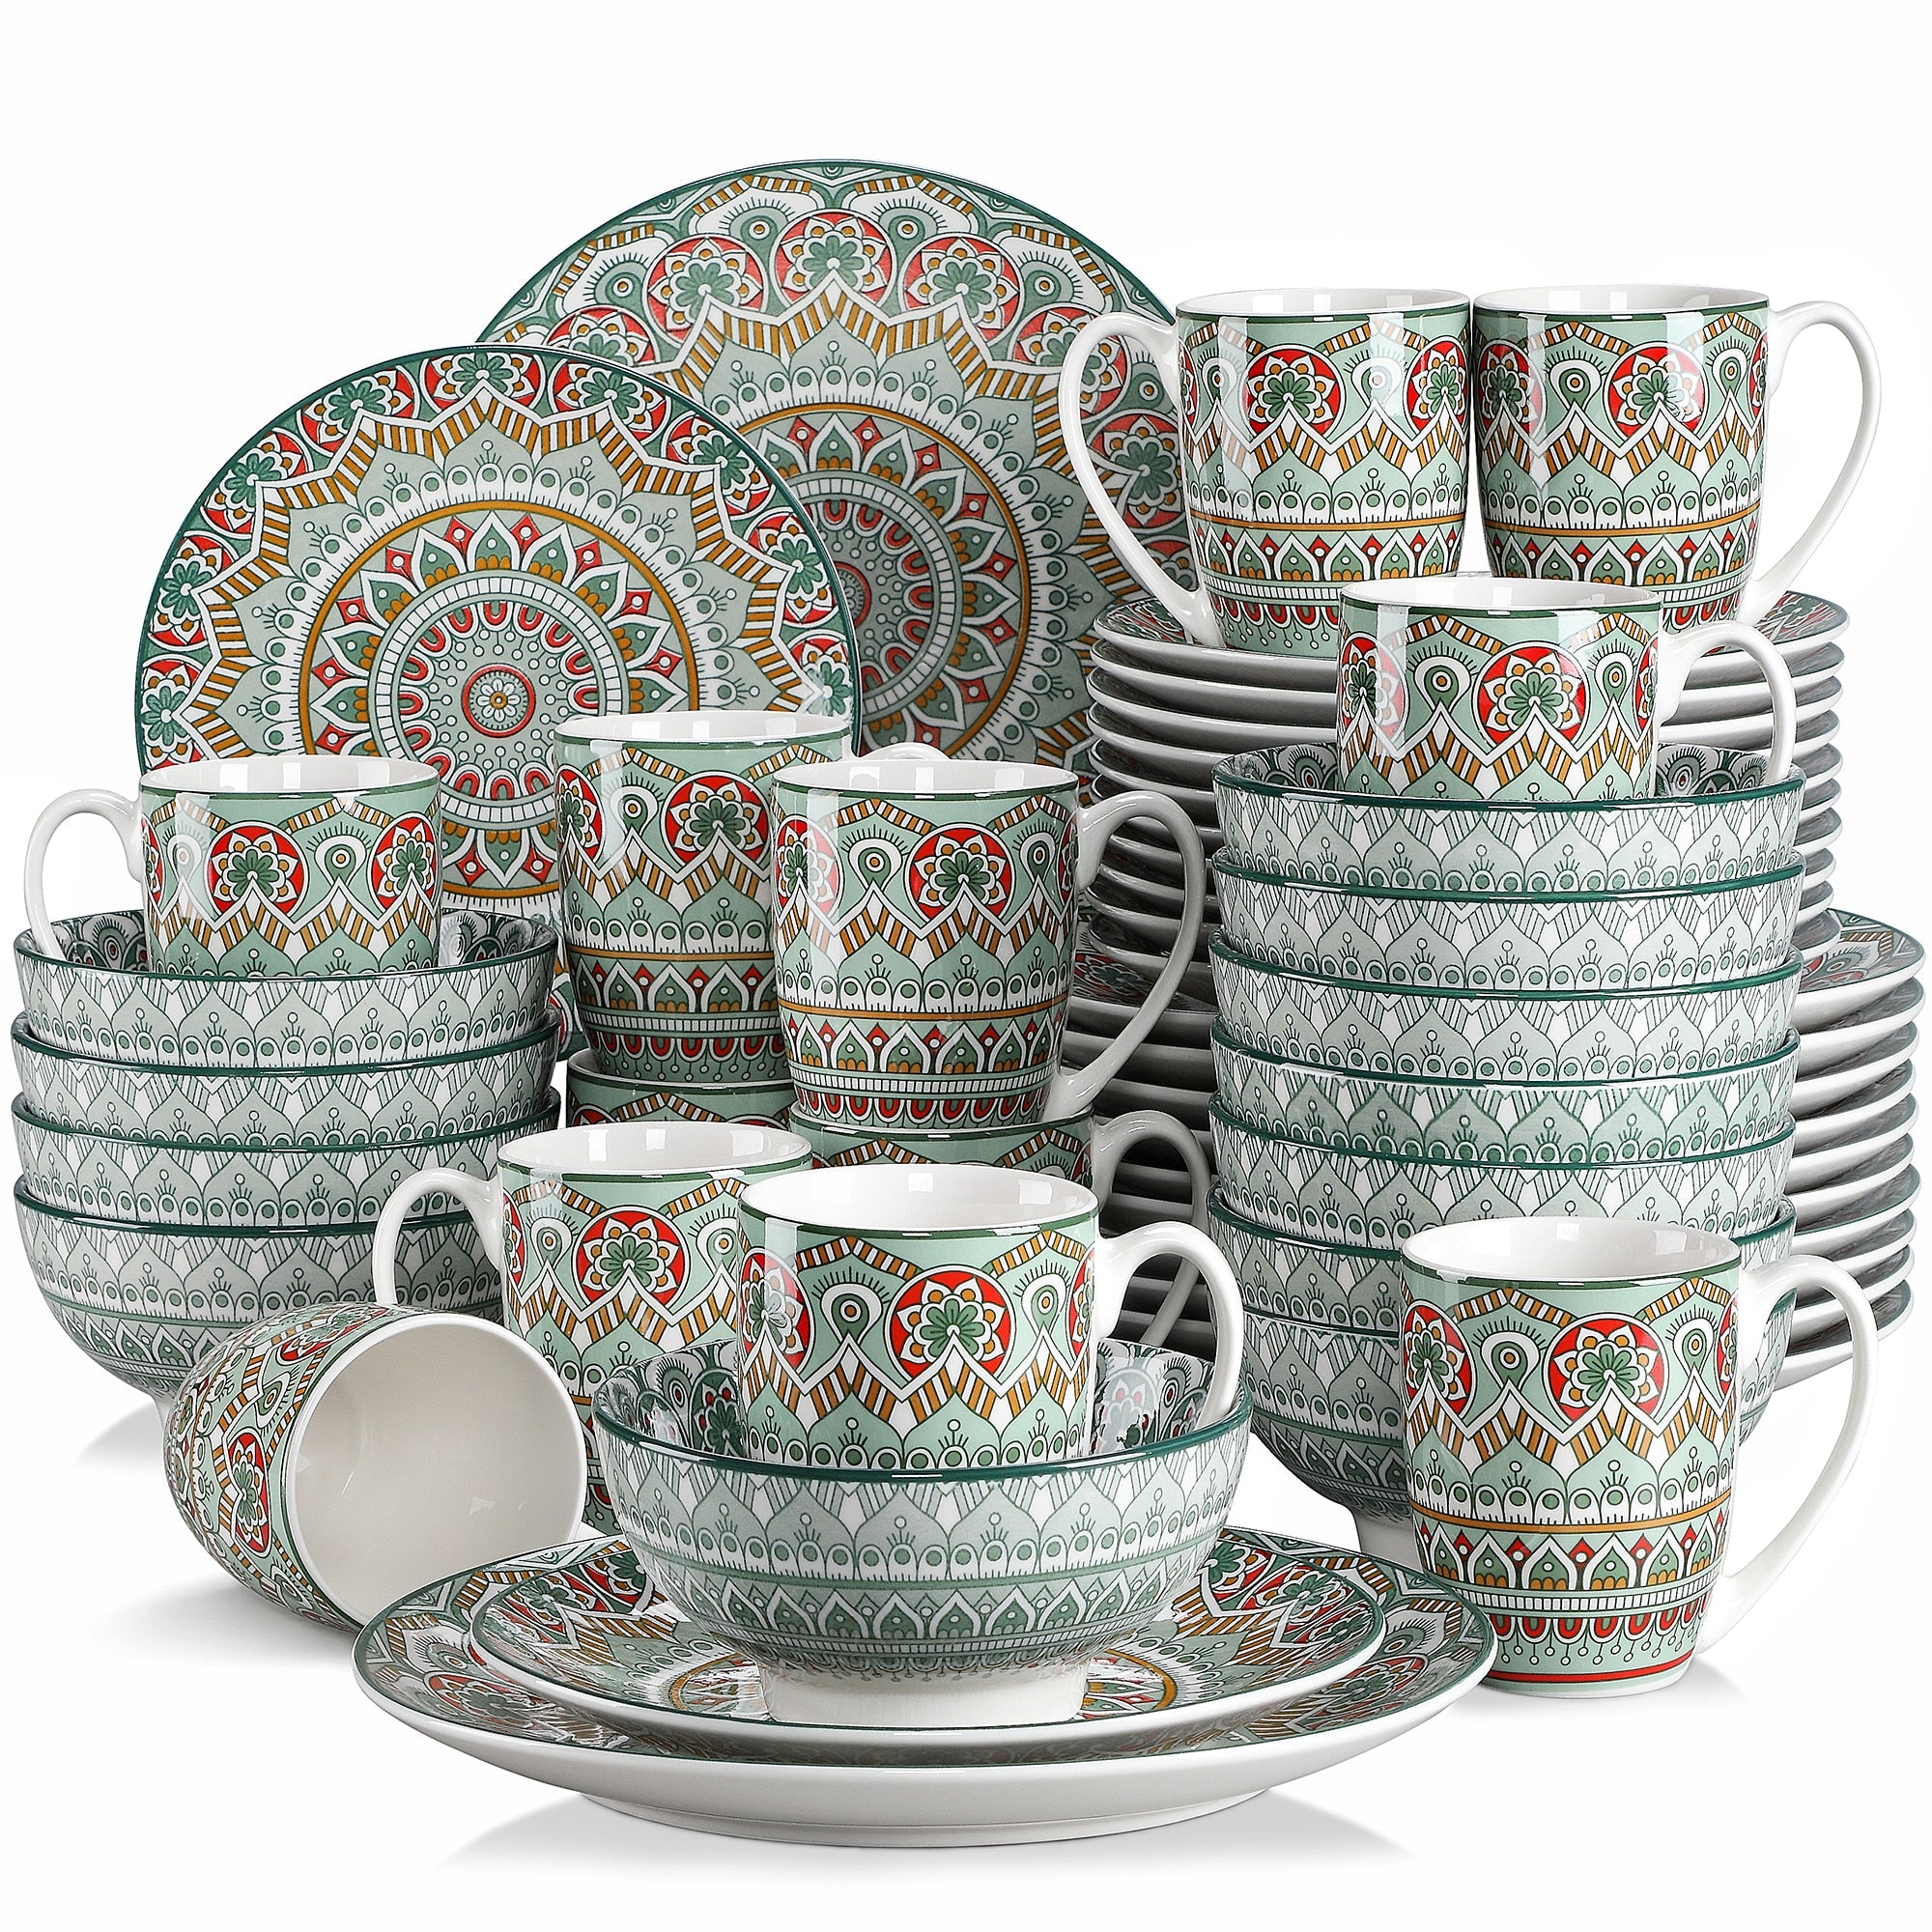 vancasso 16-Piece Patterned Colored patterned Porcelain Dinnerware